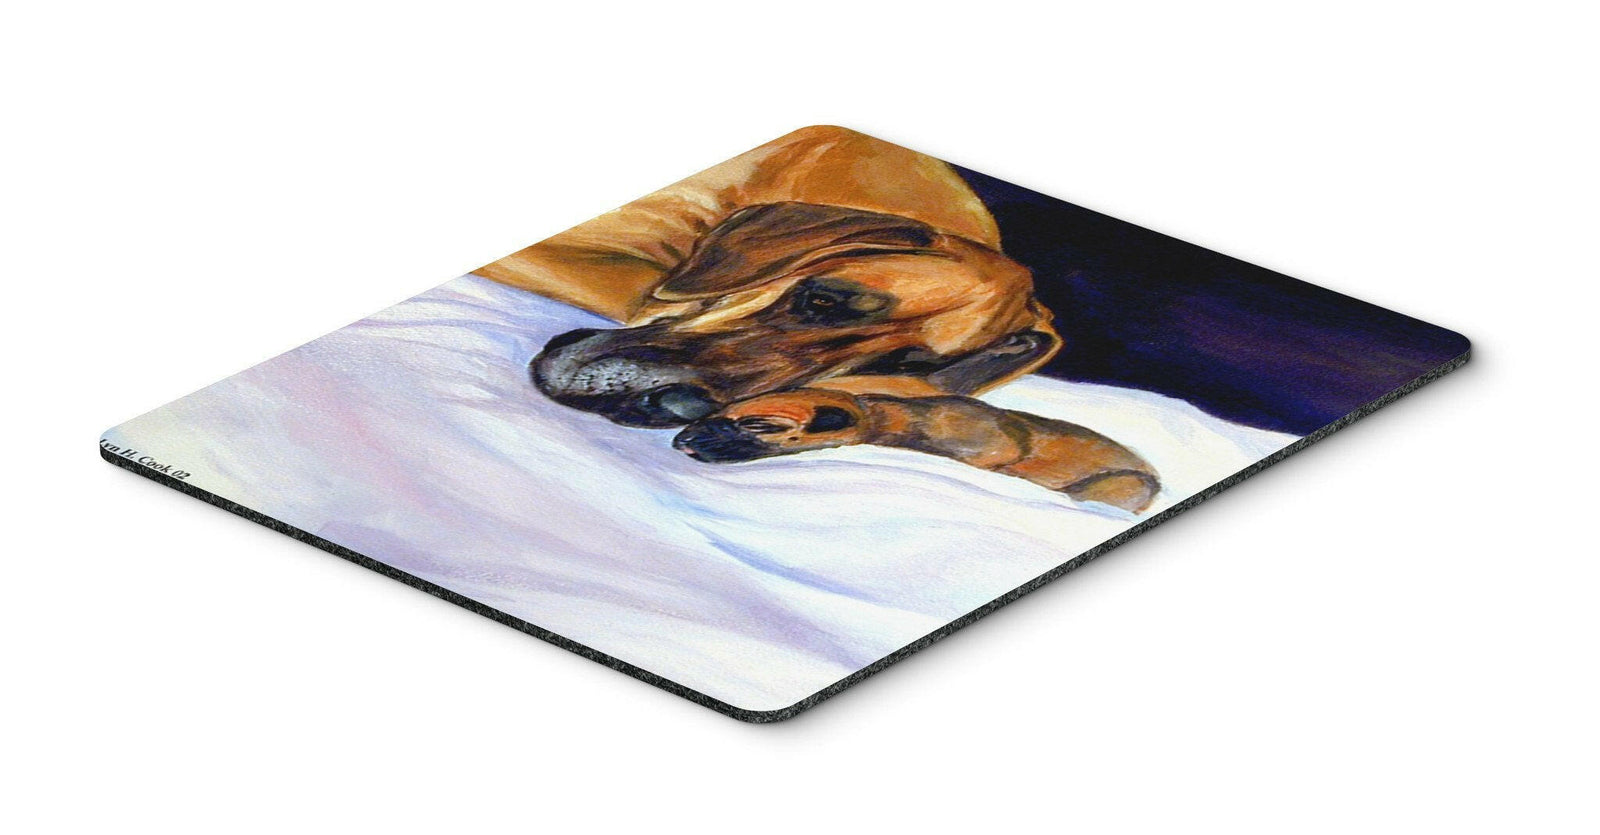 Fawn Natural Great Dane and Puppy Mouse Pad, Hot Pad or Trivet by Caroline's Treasures